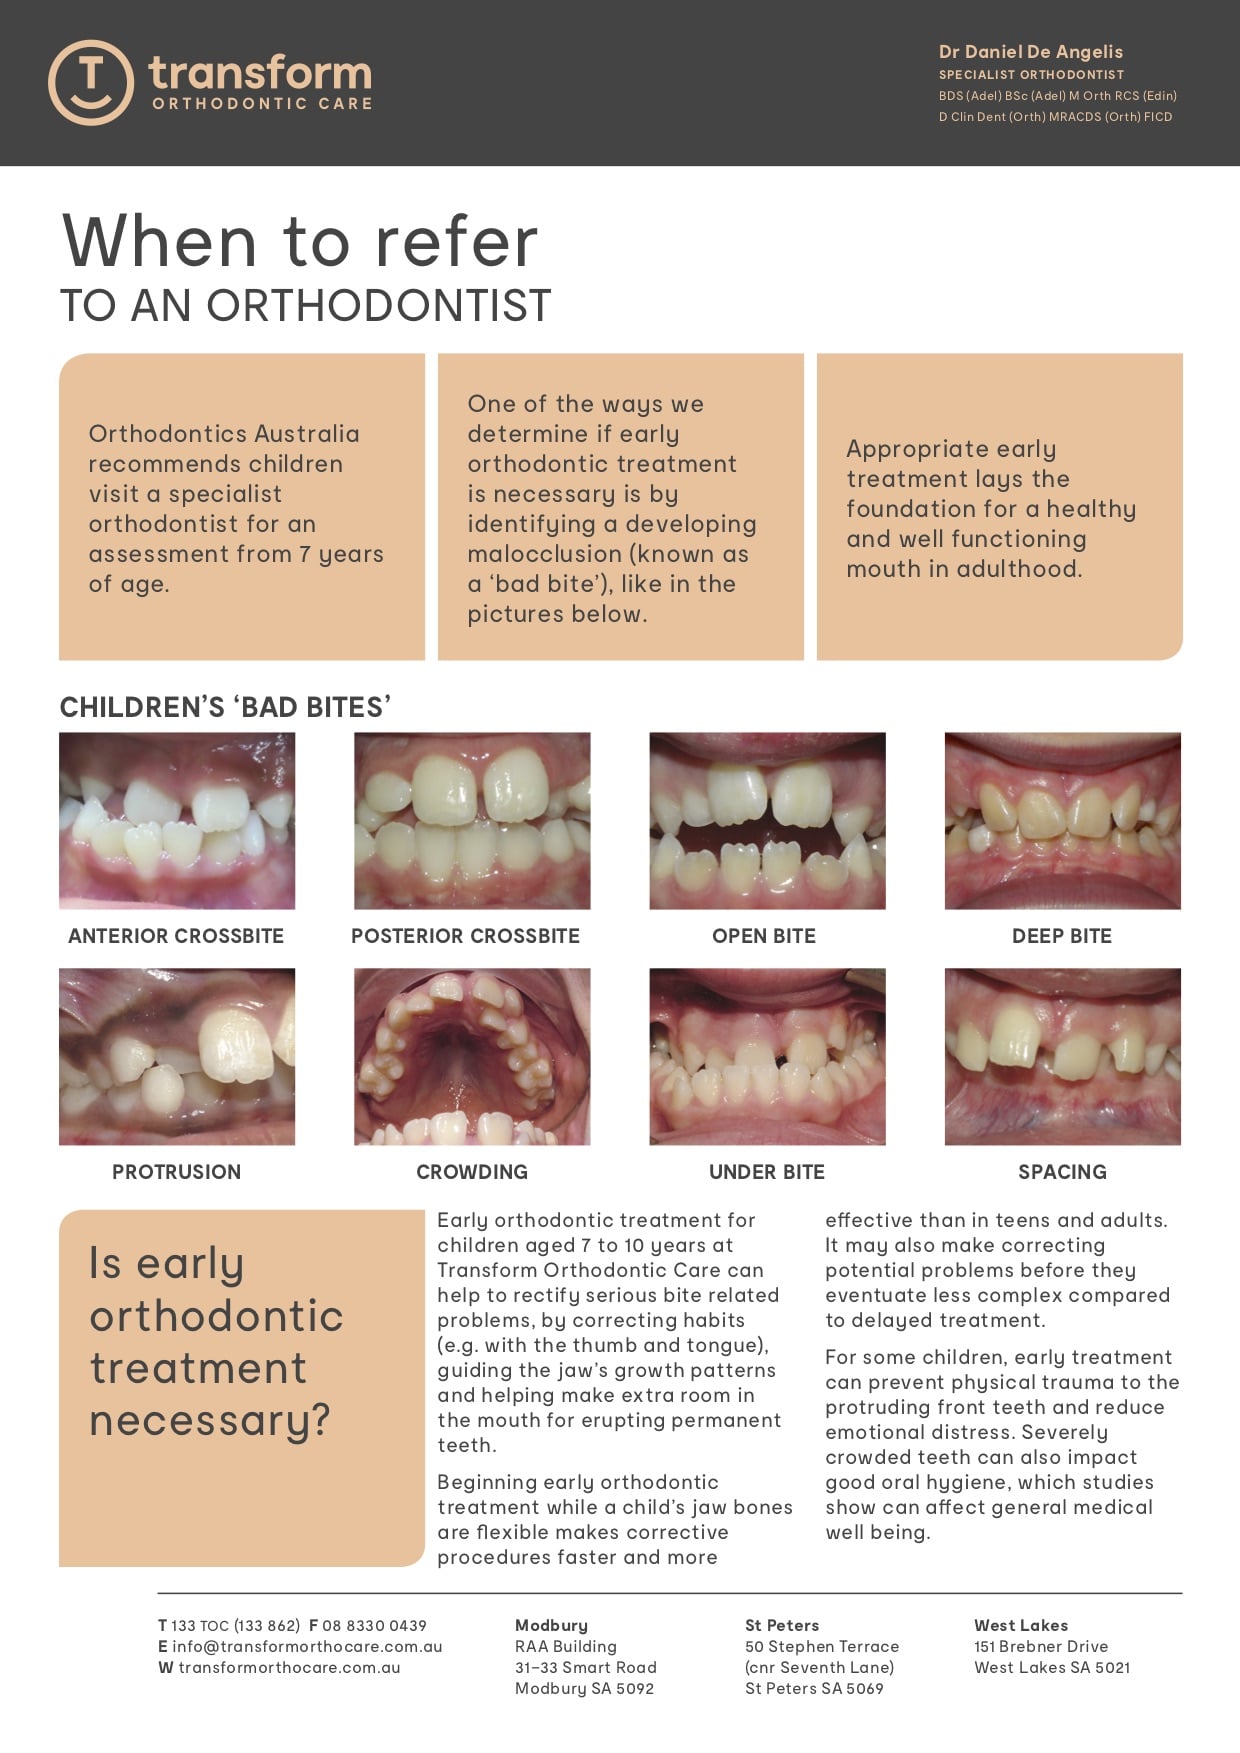 When to refer to an Orthodontist including examples of Children's 'Bad Bites'